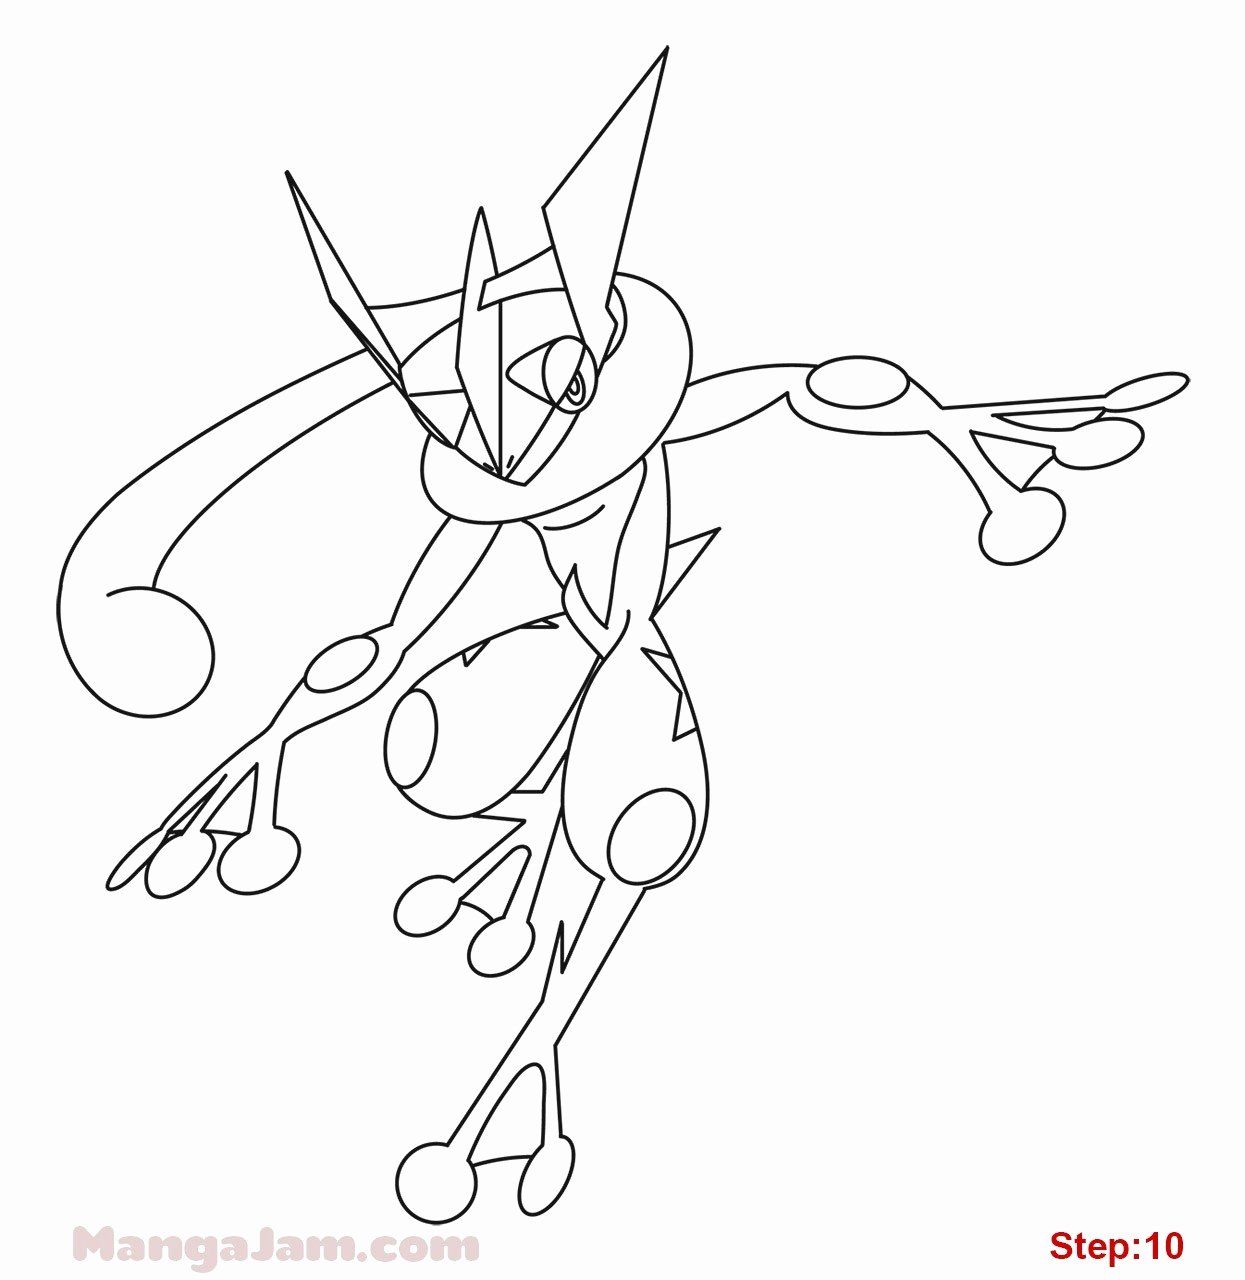 Ash Greninja Coloring Page Unique ash Greninja Coloring Pages Incredible  Pokemon Perspective in 2020 | Pokemon coloring, Unicorn coloring pages,  Pokemon coloring pages